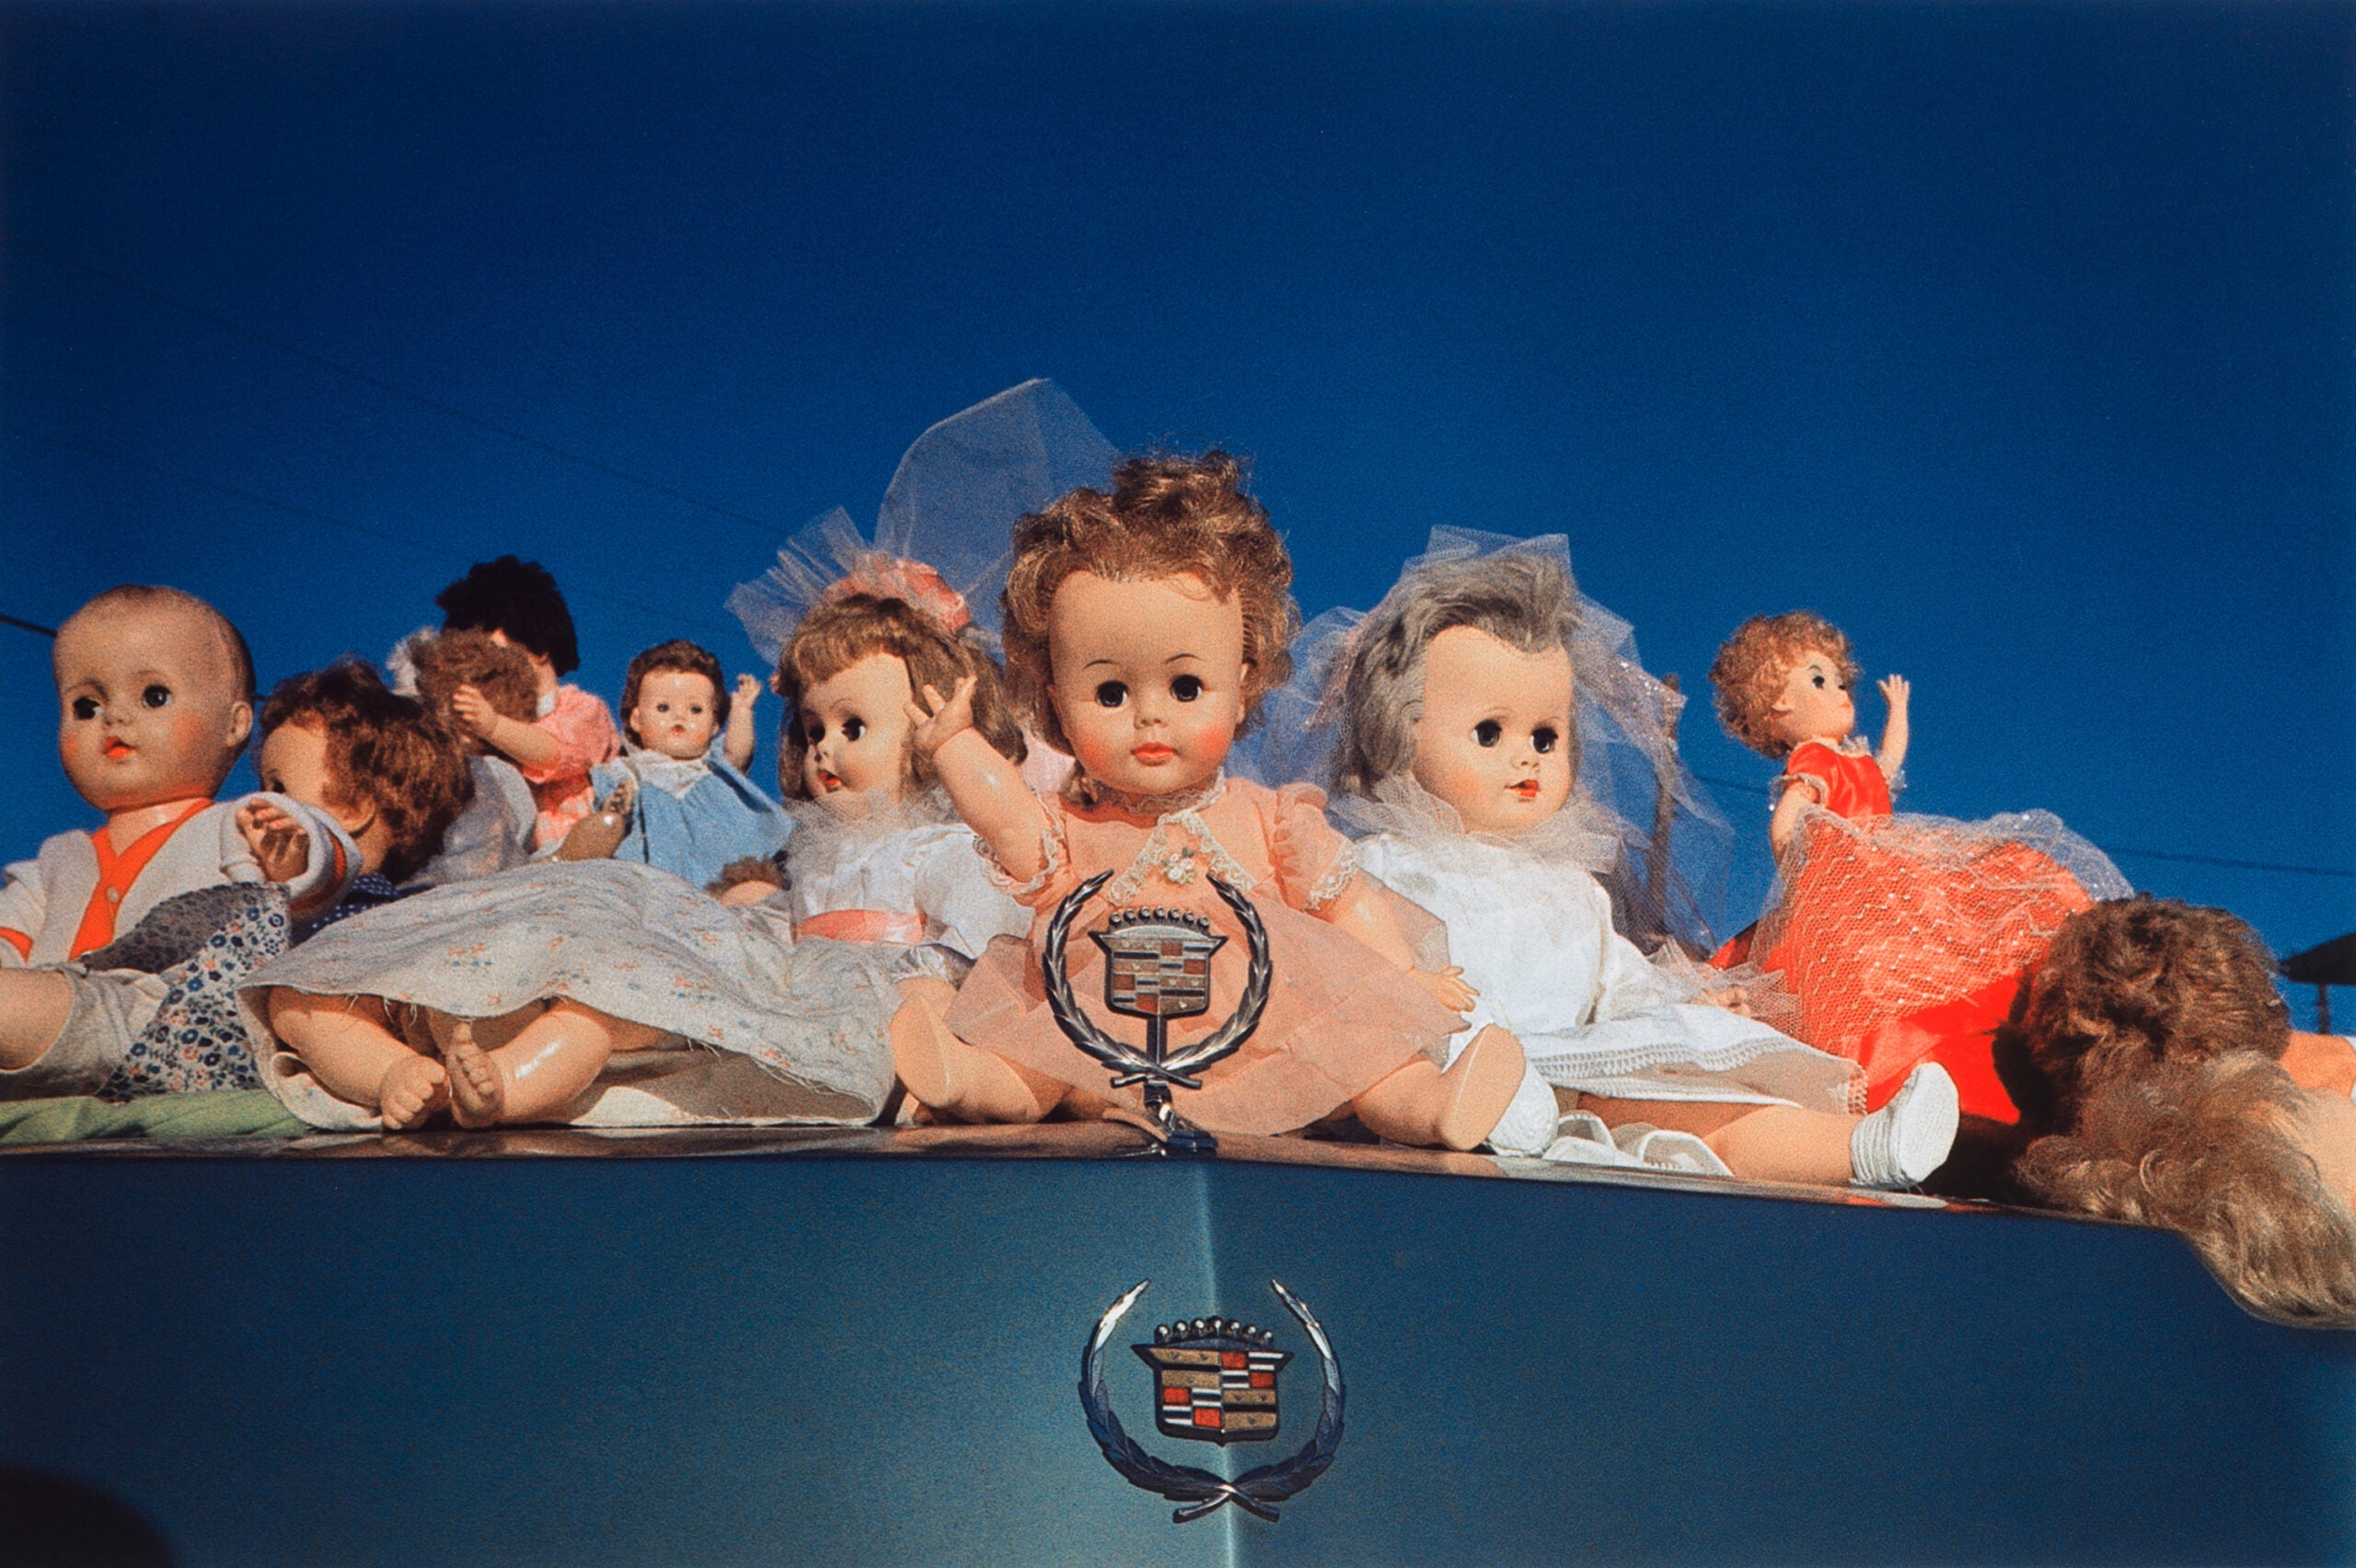 Untitled (Baby Doll Cadillac, Memphis, Tennessee), 1973, from 10.D.70.V2 Portfolio. Dye transfer print, 1996, 11 7/8 x 17 Â¾ inches.